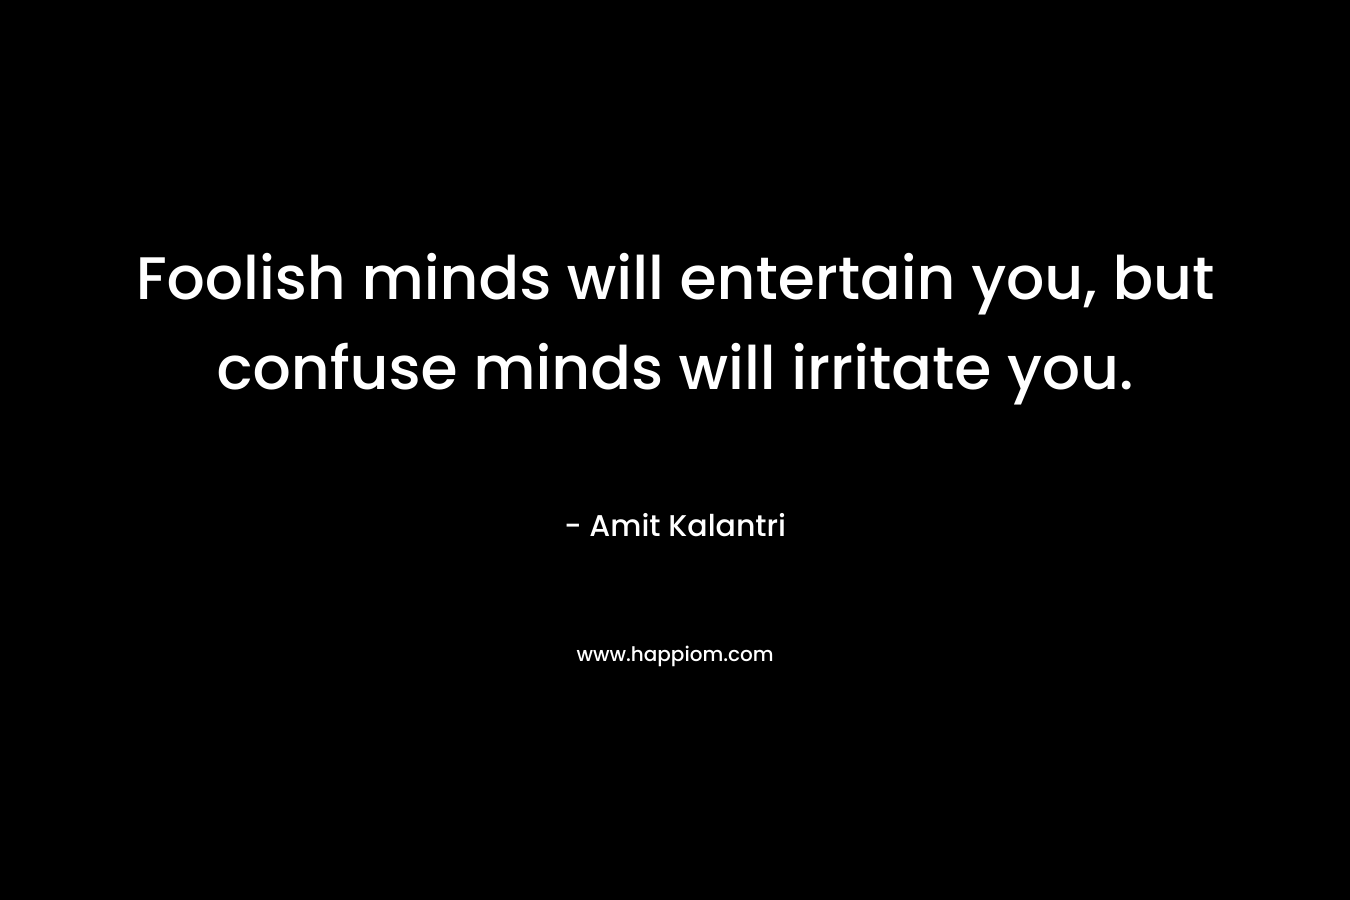 Foolish minds will entertain you, but confuse minds will irritate you.